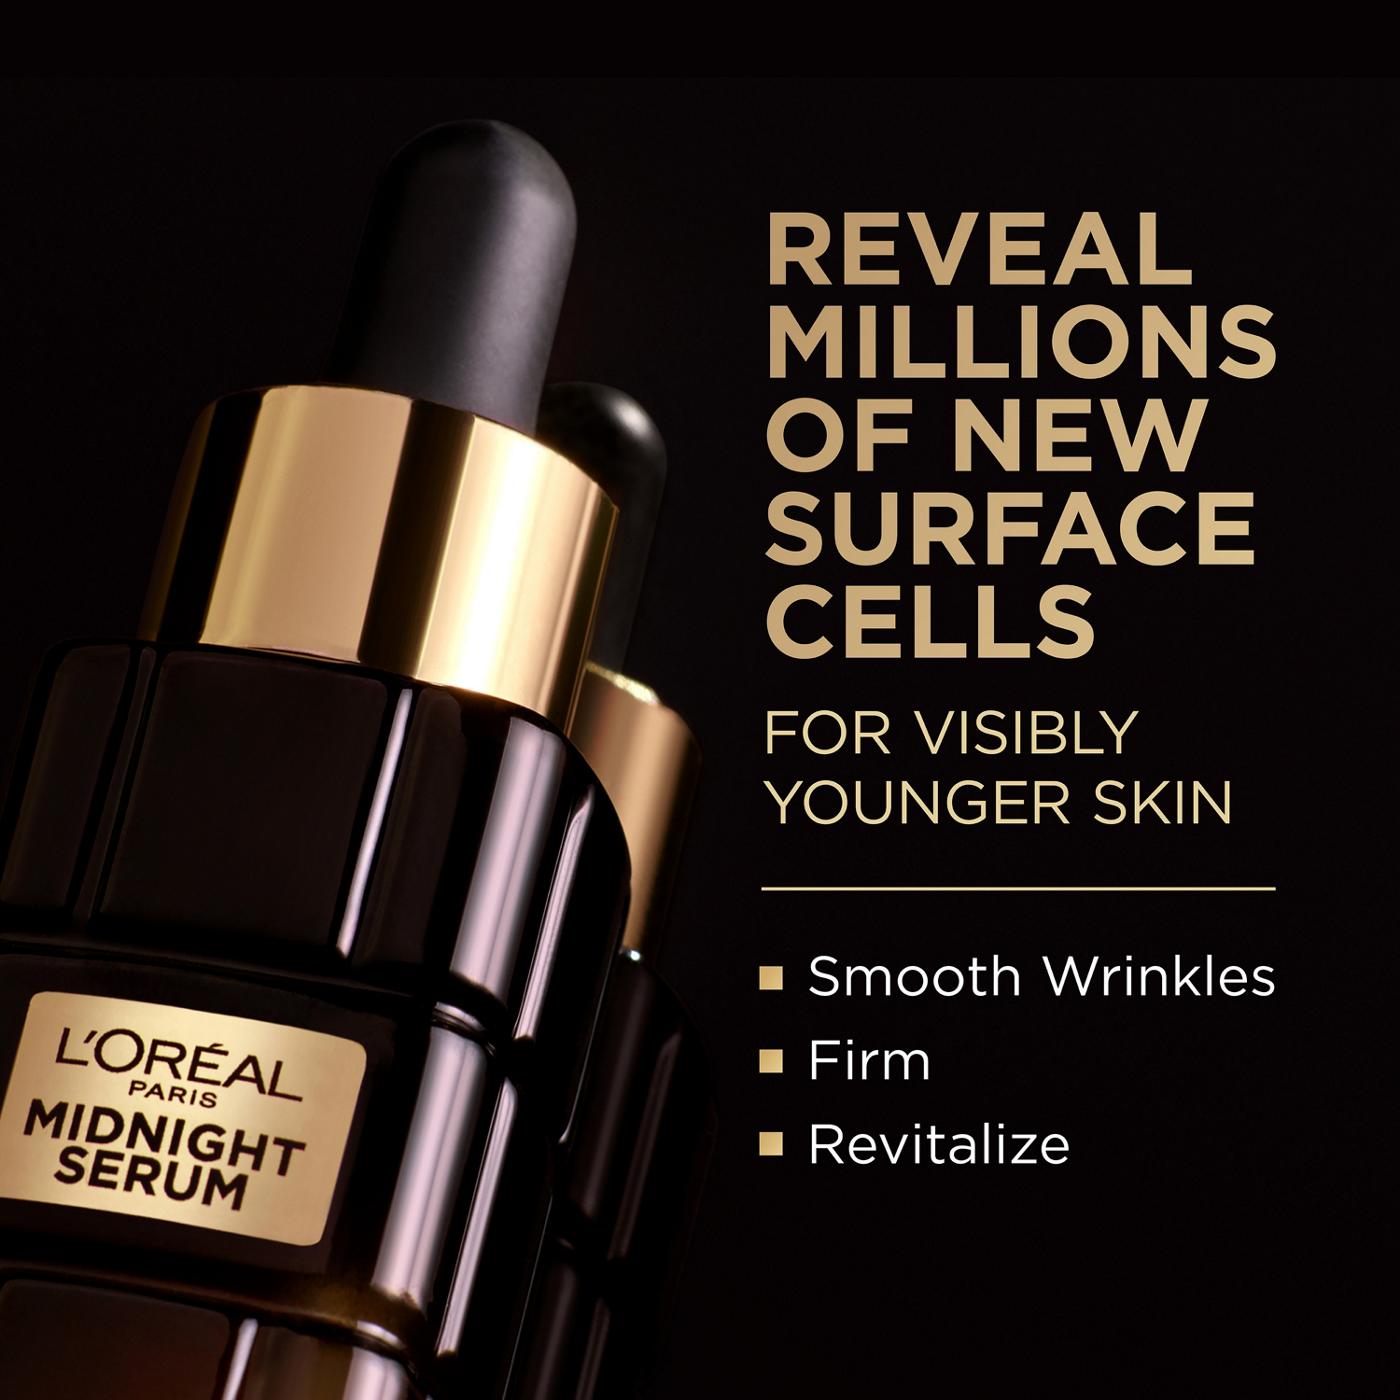 L'Oréal Paris Age Perfect Cell Renewal Midnight Serum Anti-Aging Complex; image 4 of 9